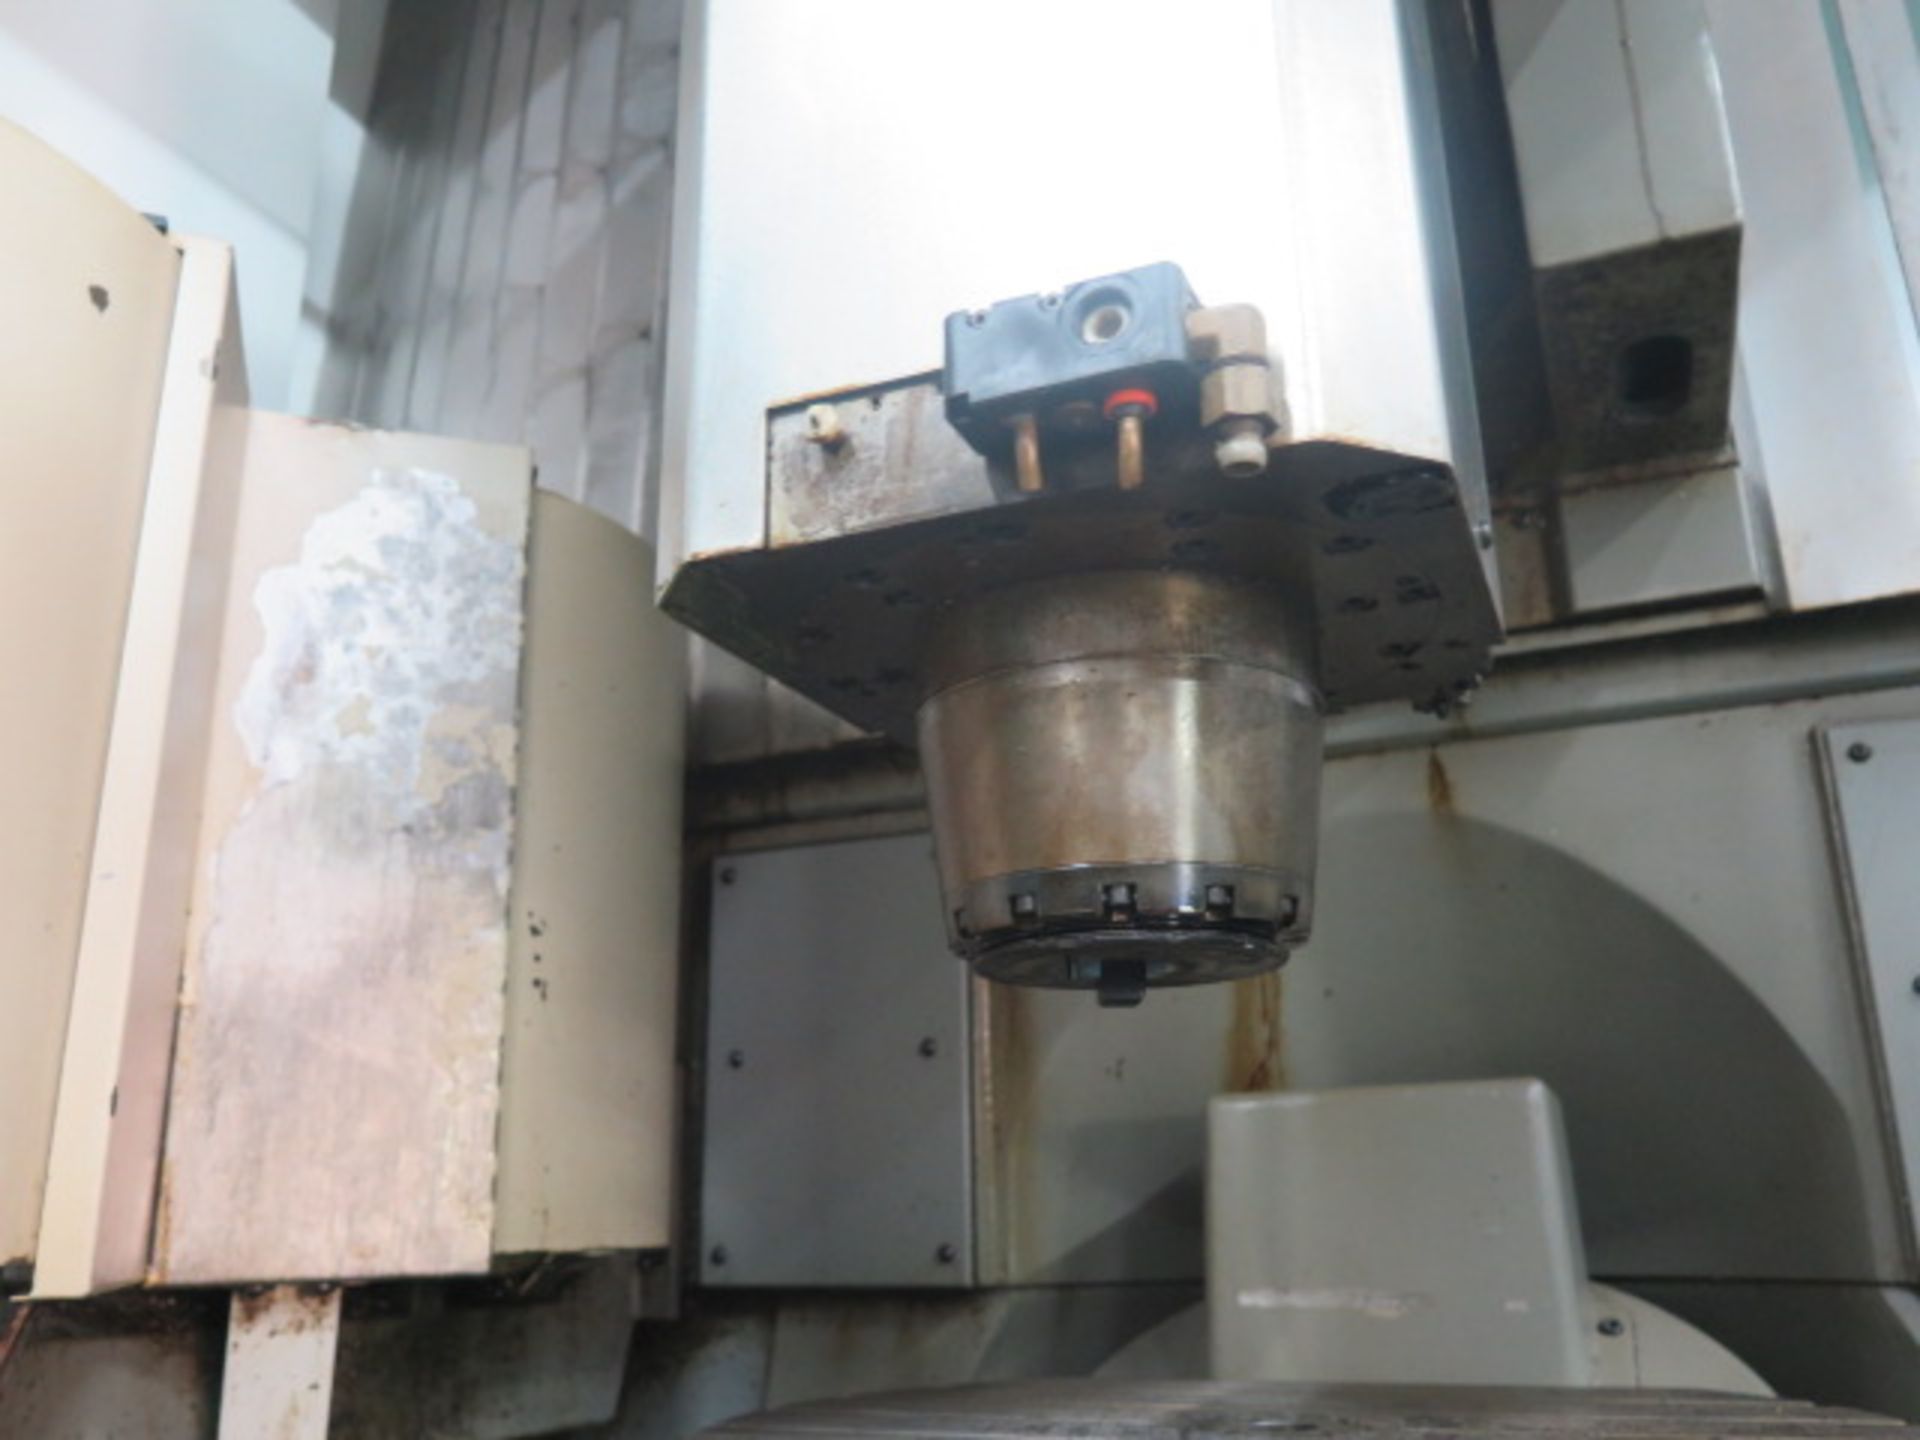 Deckel MAHO DMU50V 4-Axis CNC Vertical Machining Center (NEEDS WORK) s/n 054820 w/ Deckel Mill - Image 5 of 13